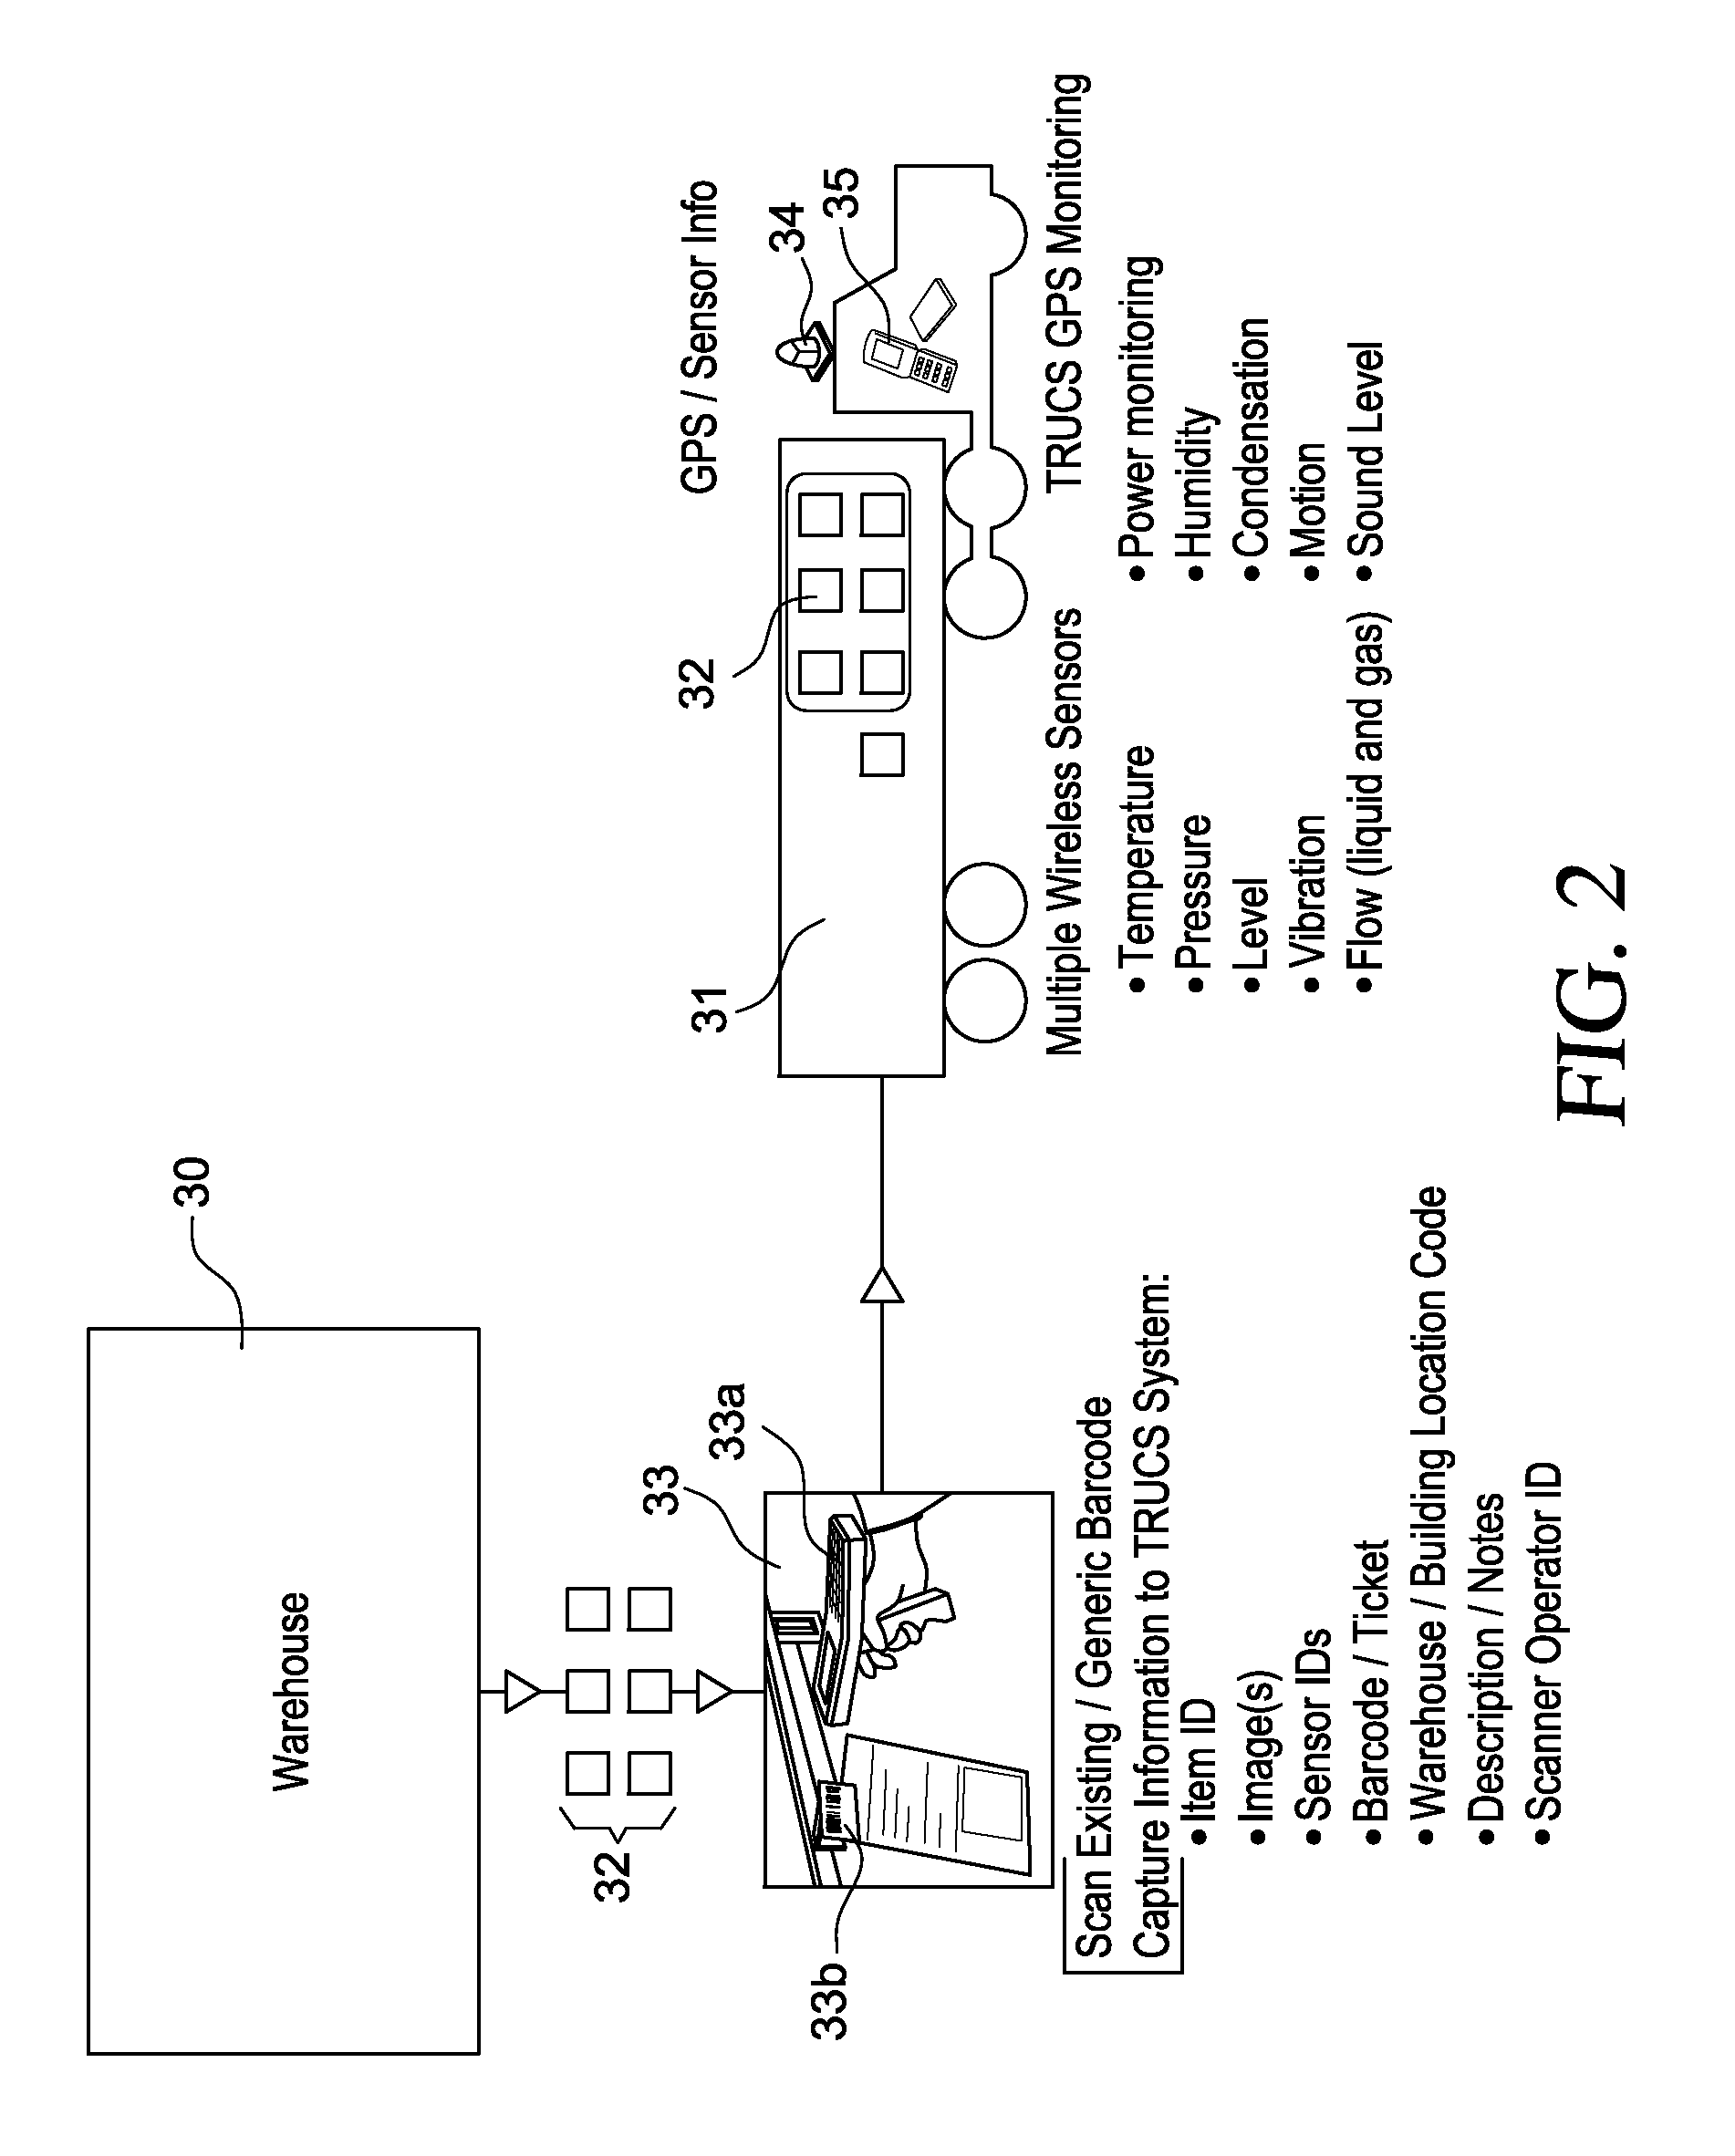 System and methods for transportation utilization and control